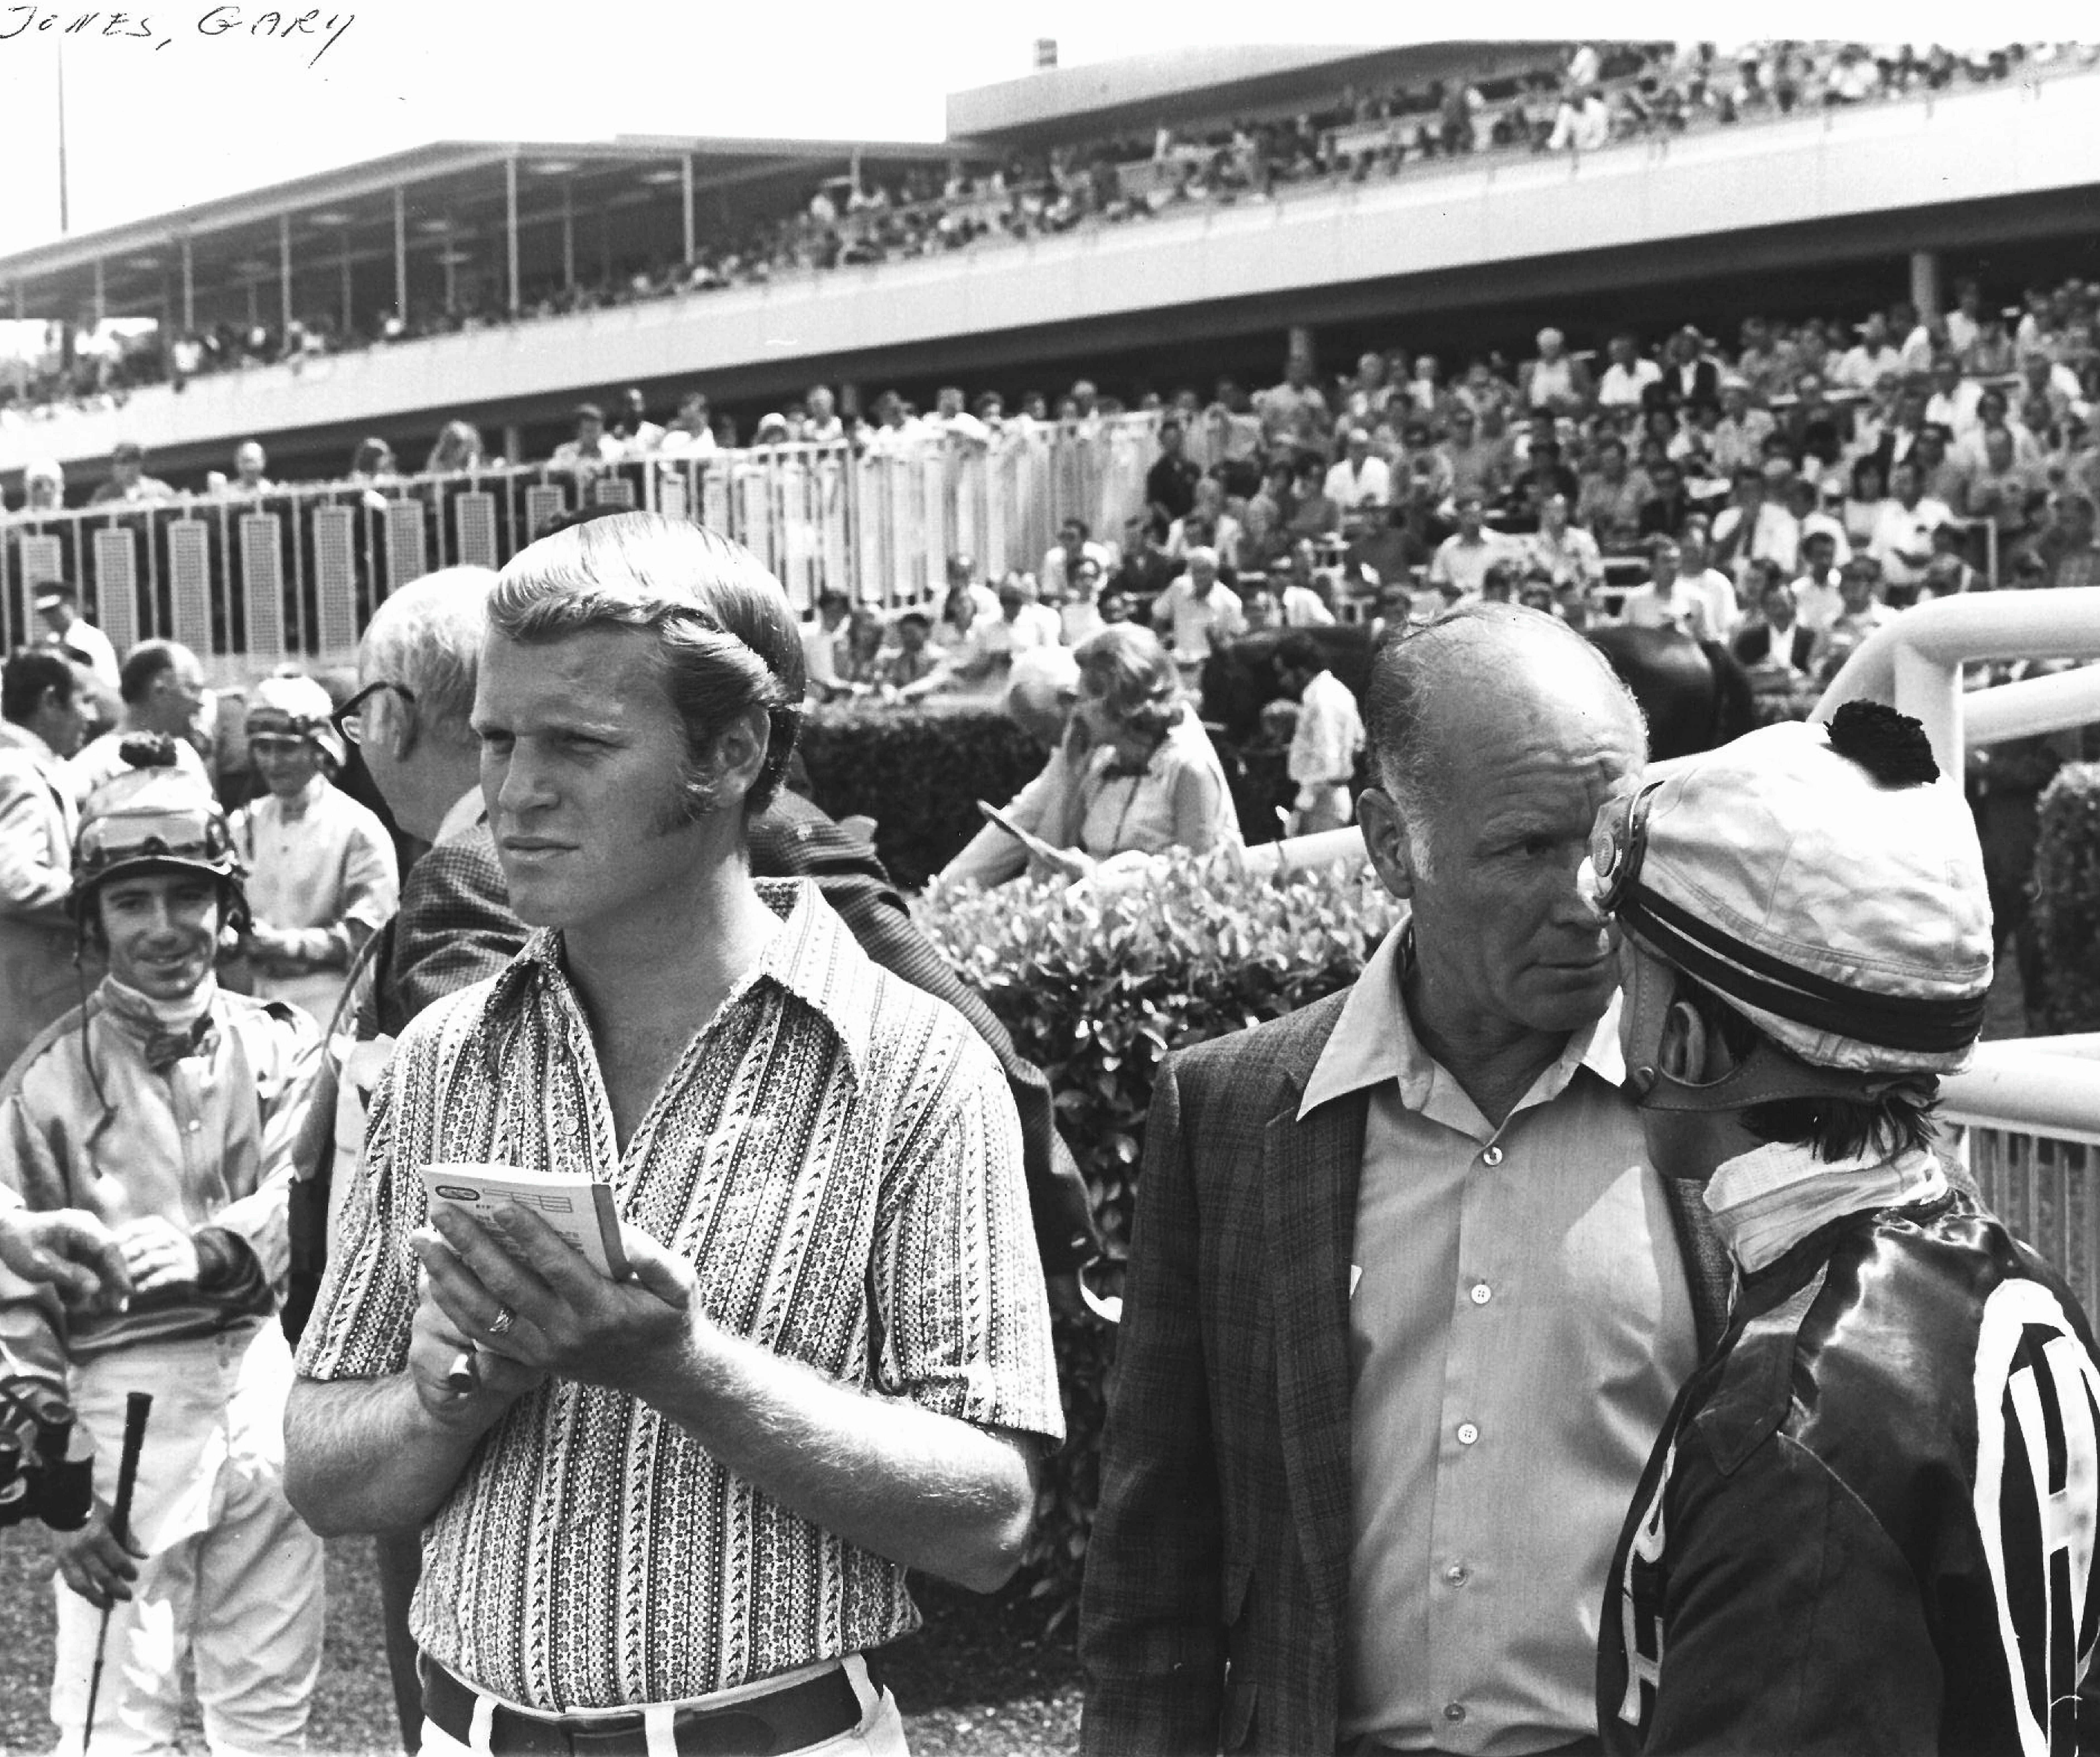 A young Gary Jones at the track with his father, Farrell Jones, amidst the jockey colony before a race (Benoit Photo)